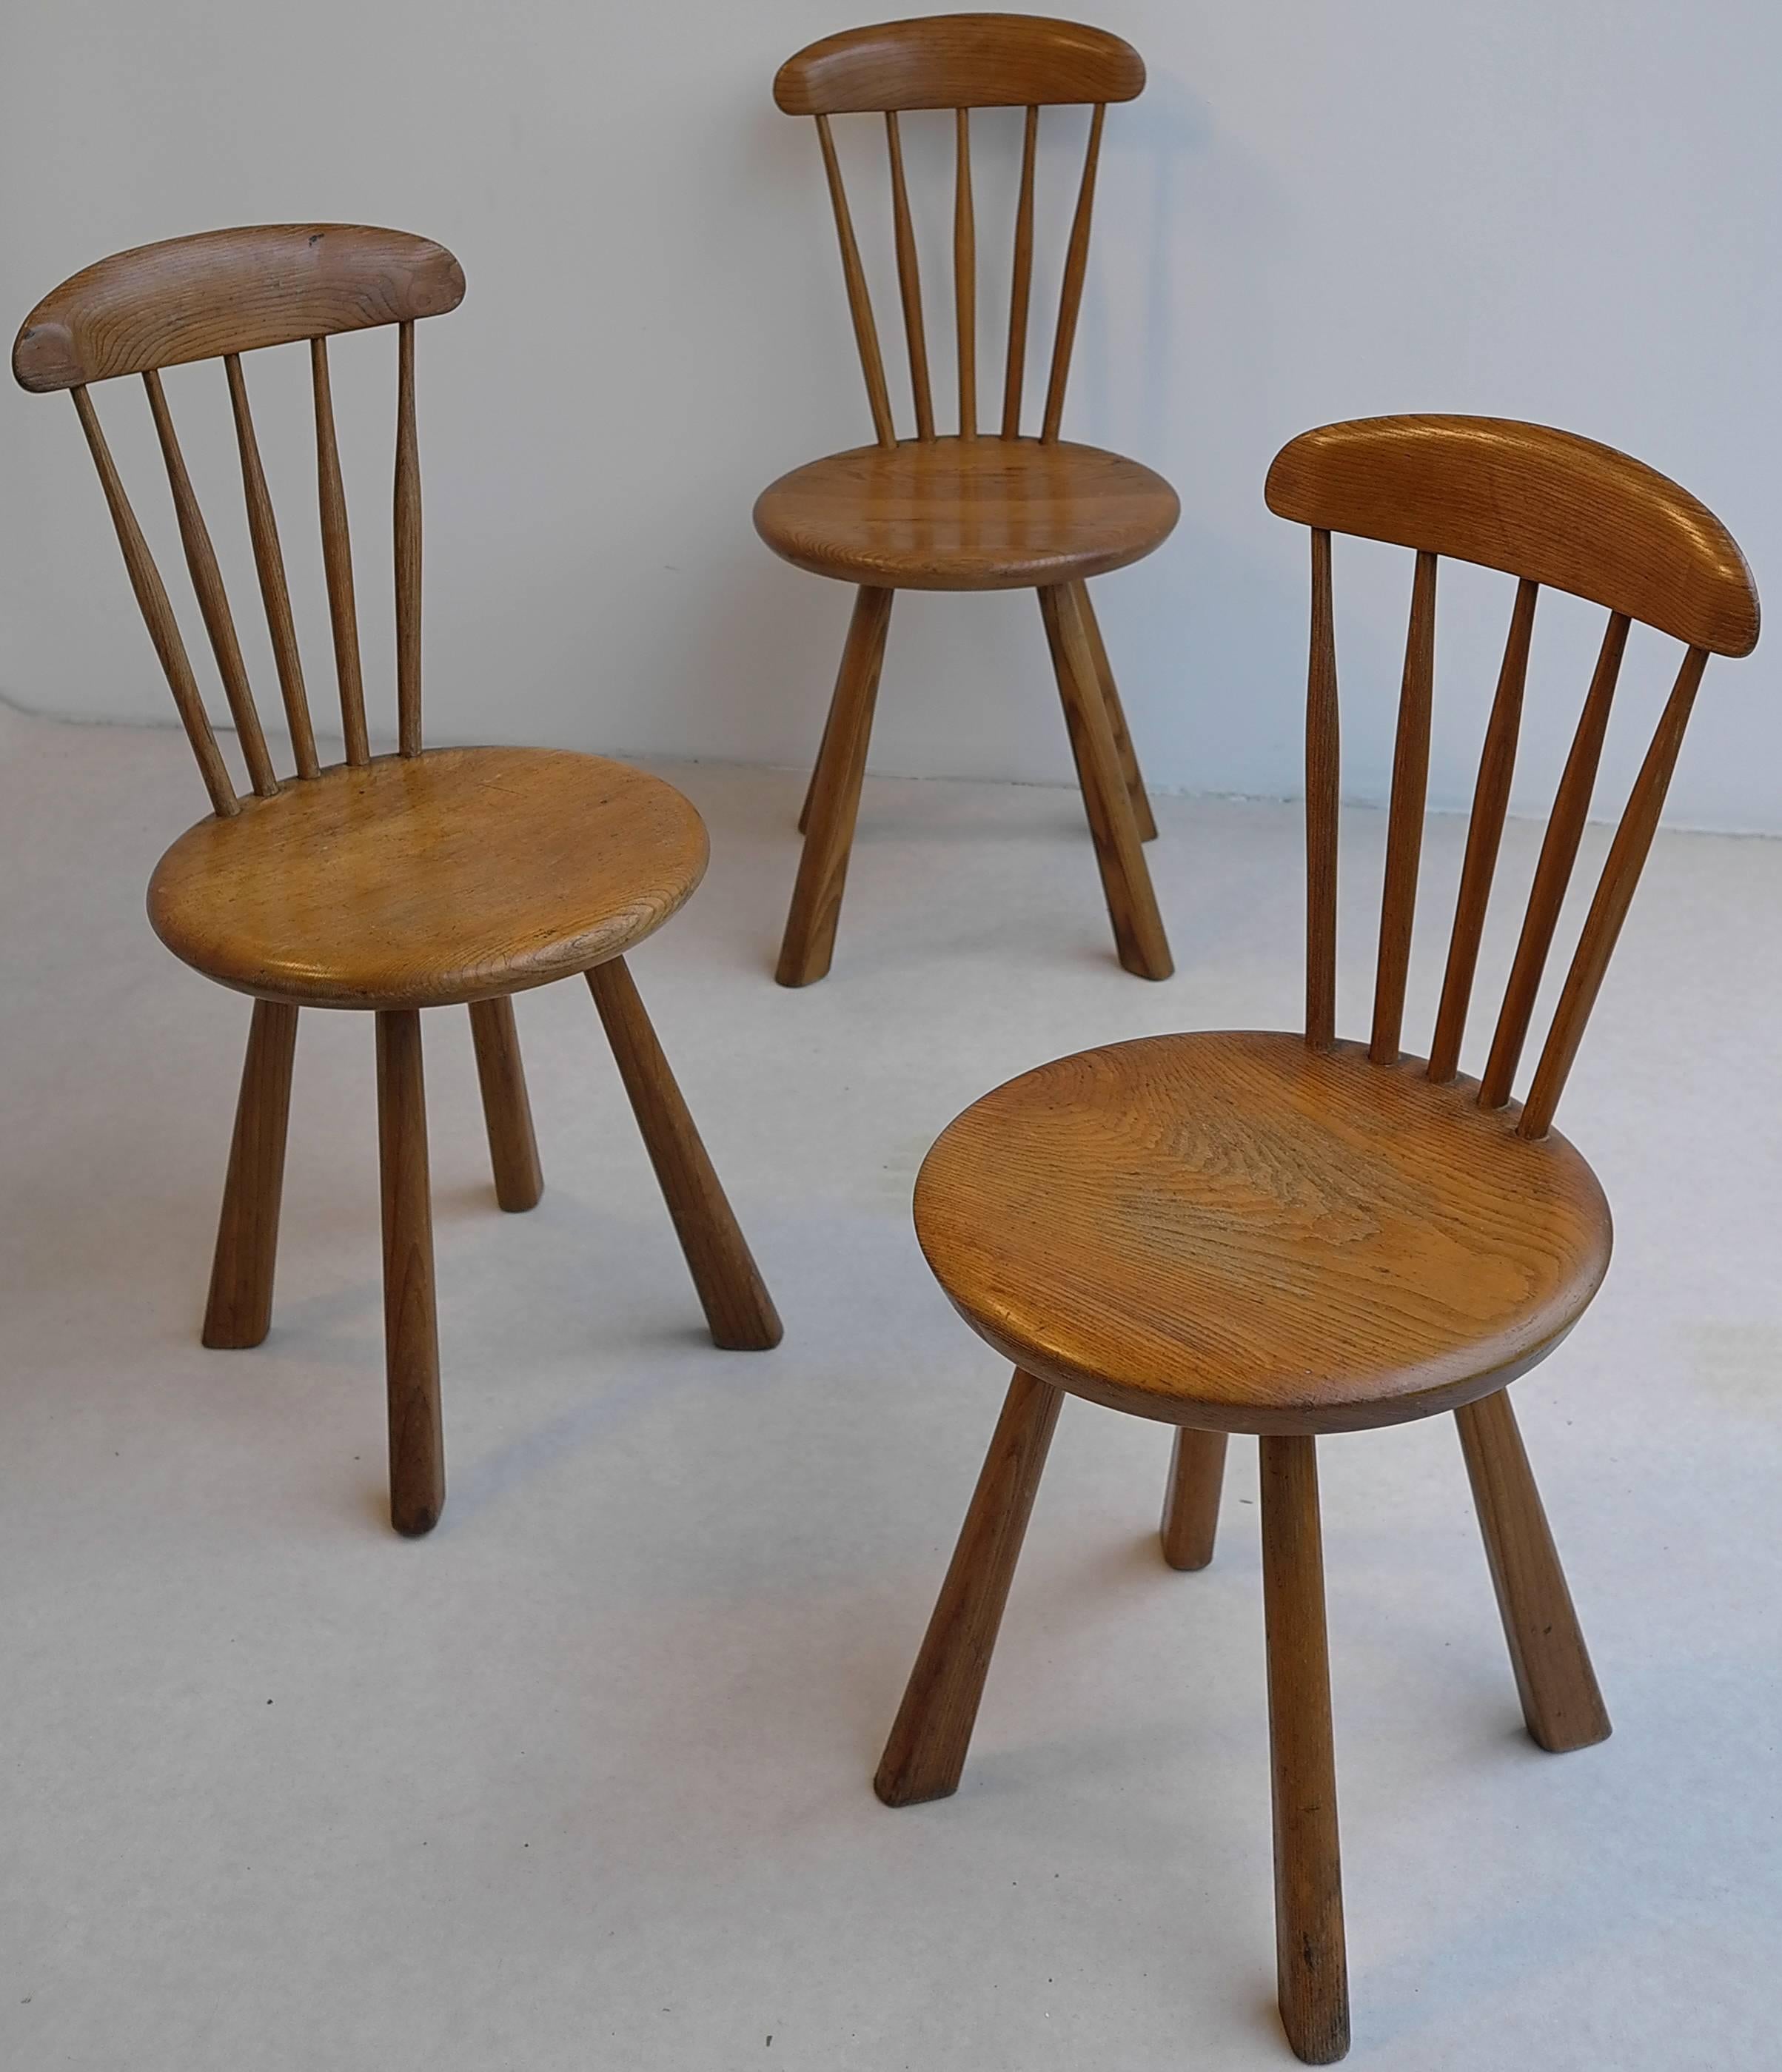 Solid pine side chairs/stools, France 1950's

These stools have a beautifull structure in the solid pine wood and a warm natural patina.